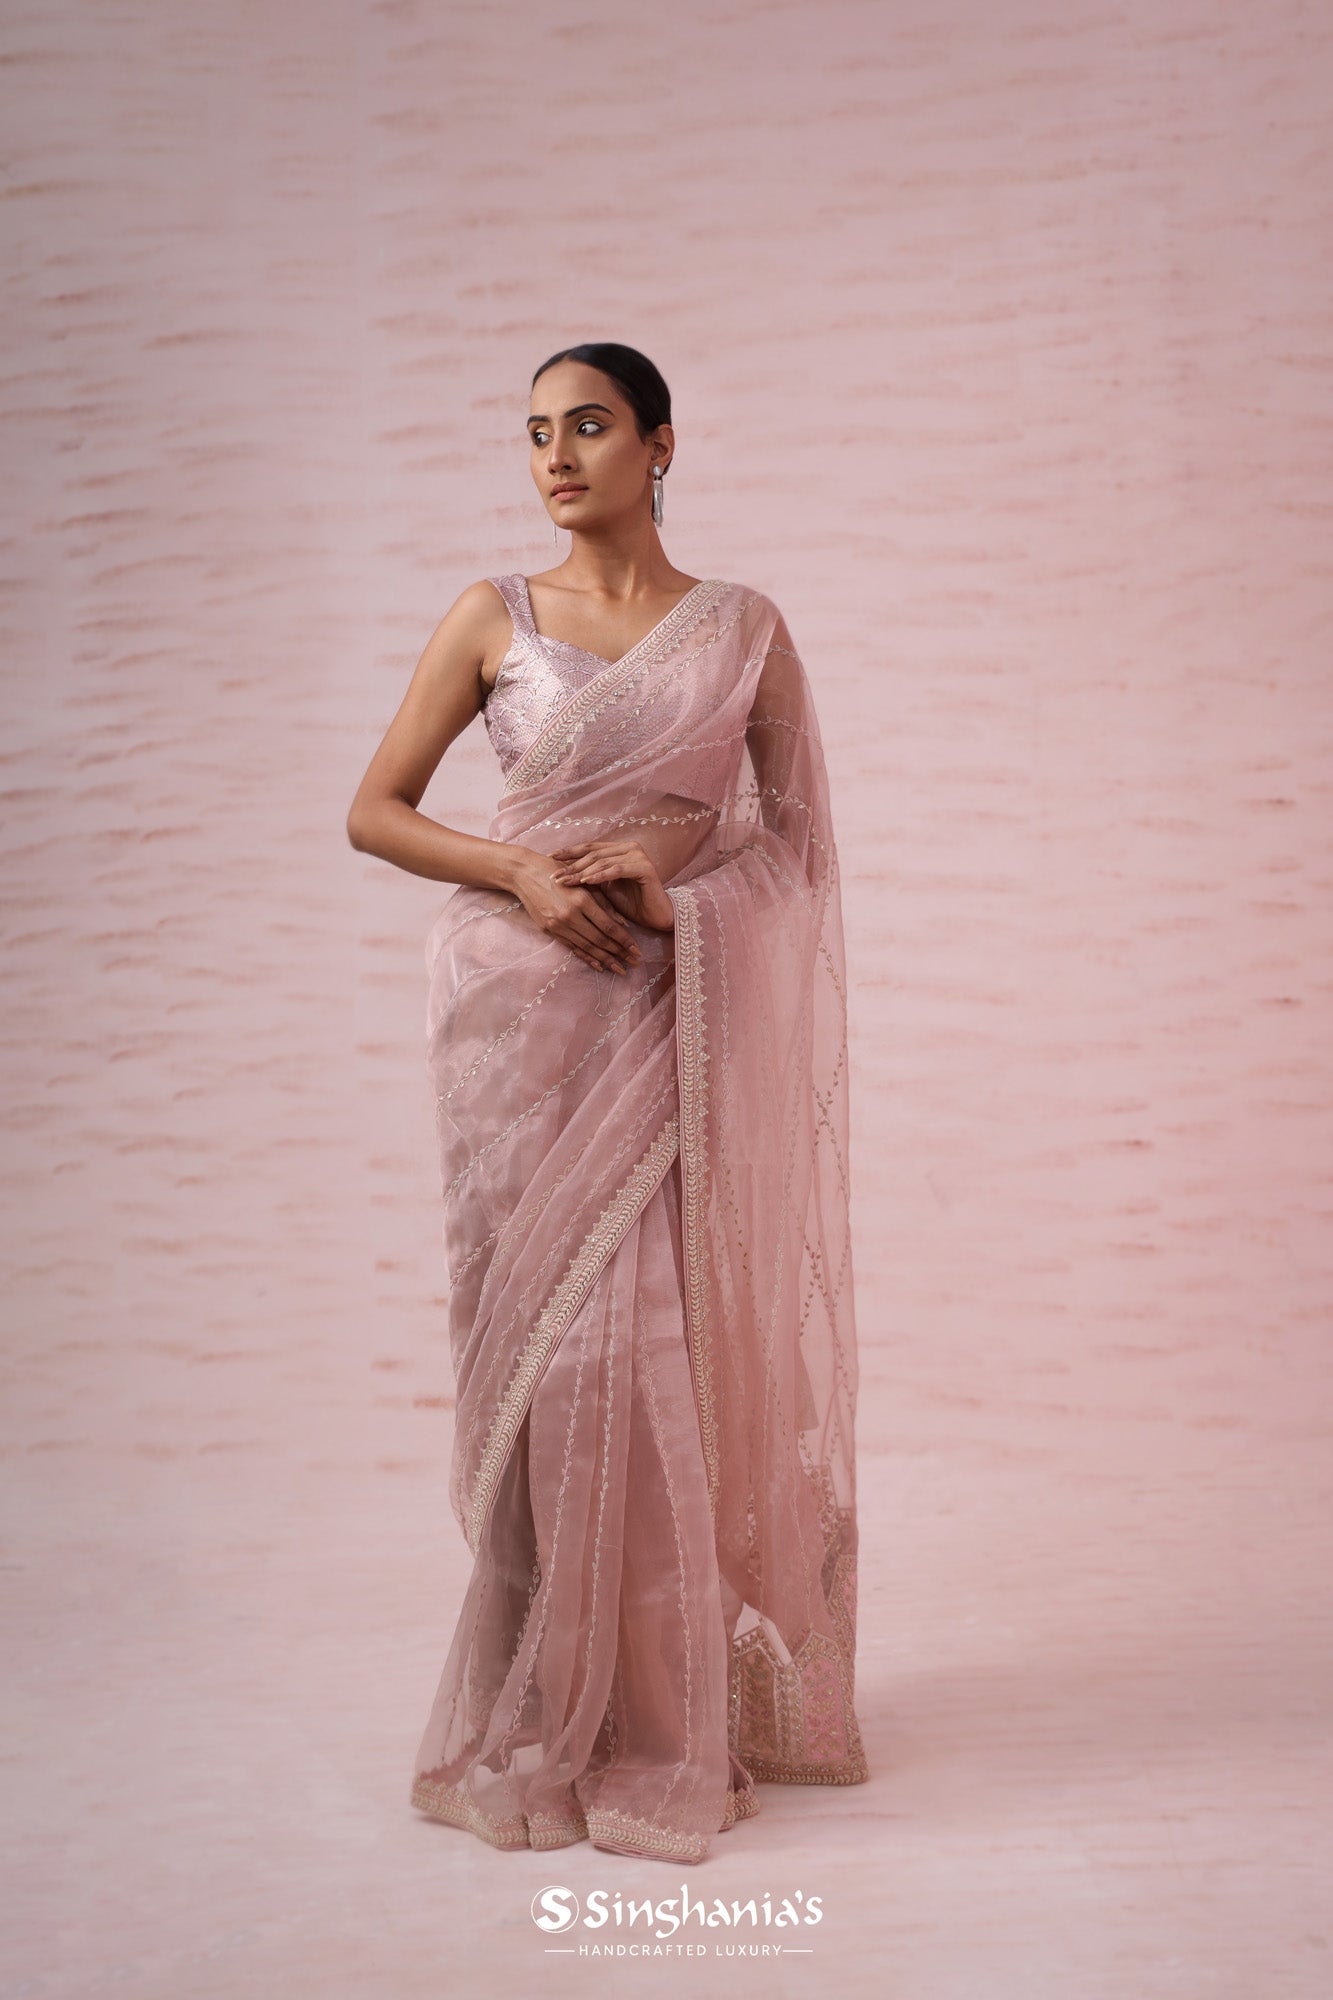 Lemonade Pink Tissue Organza Saree With Hand Embroidery